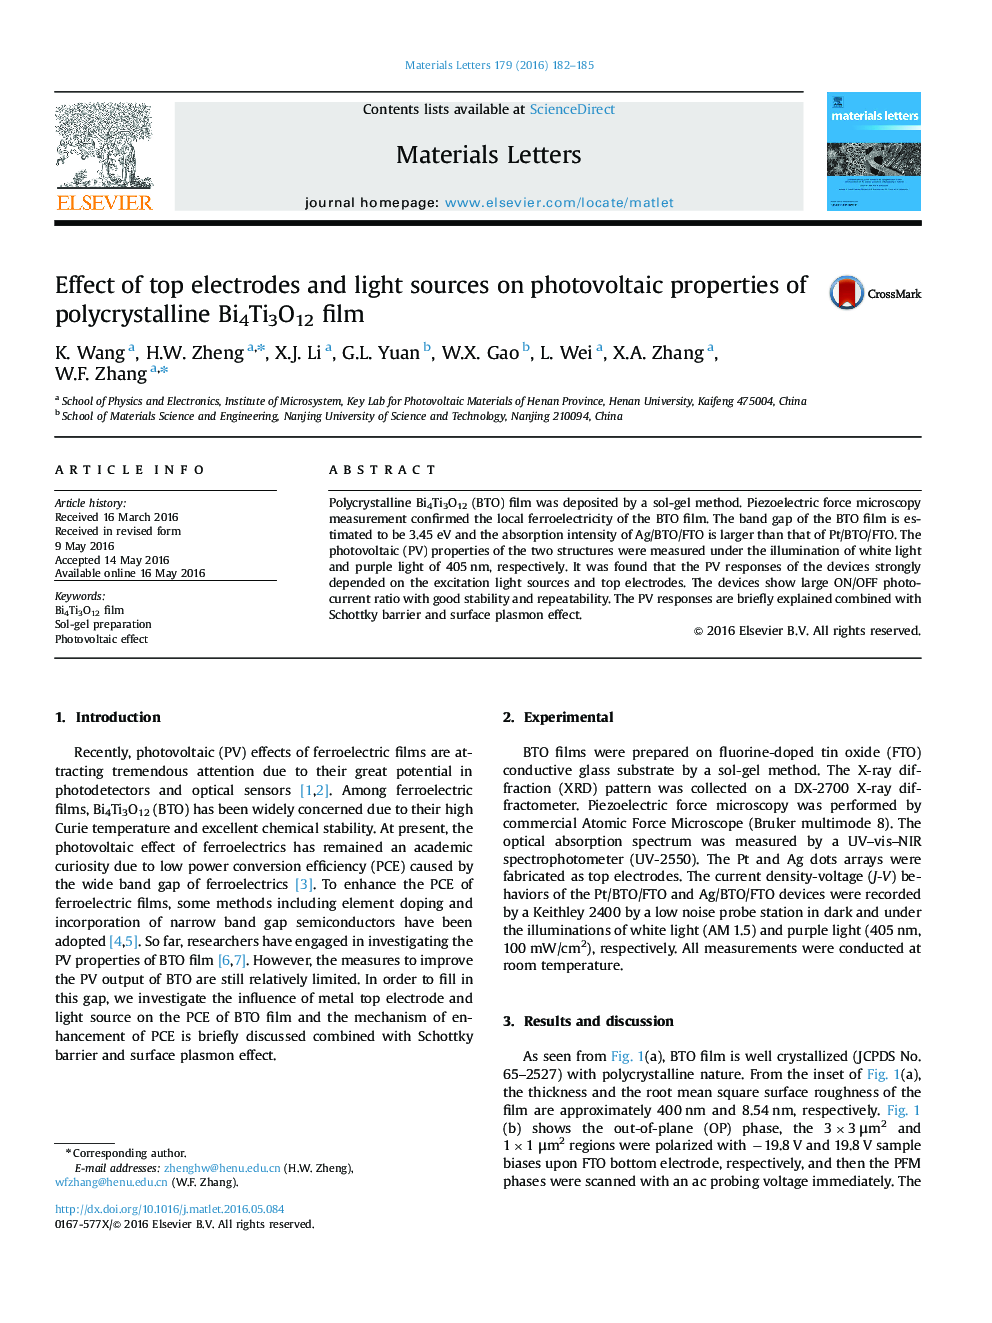 Effect of top electrodes and light sources on photovoltaic properties of polycrystalline Bi4Ti3O12 film